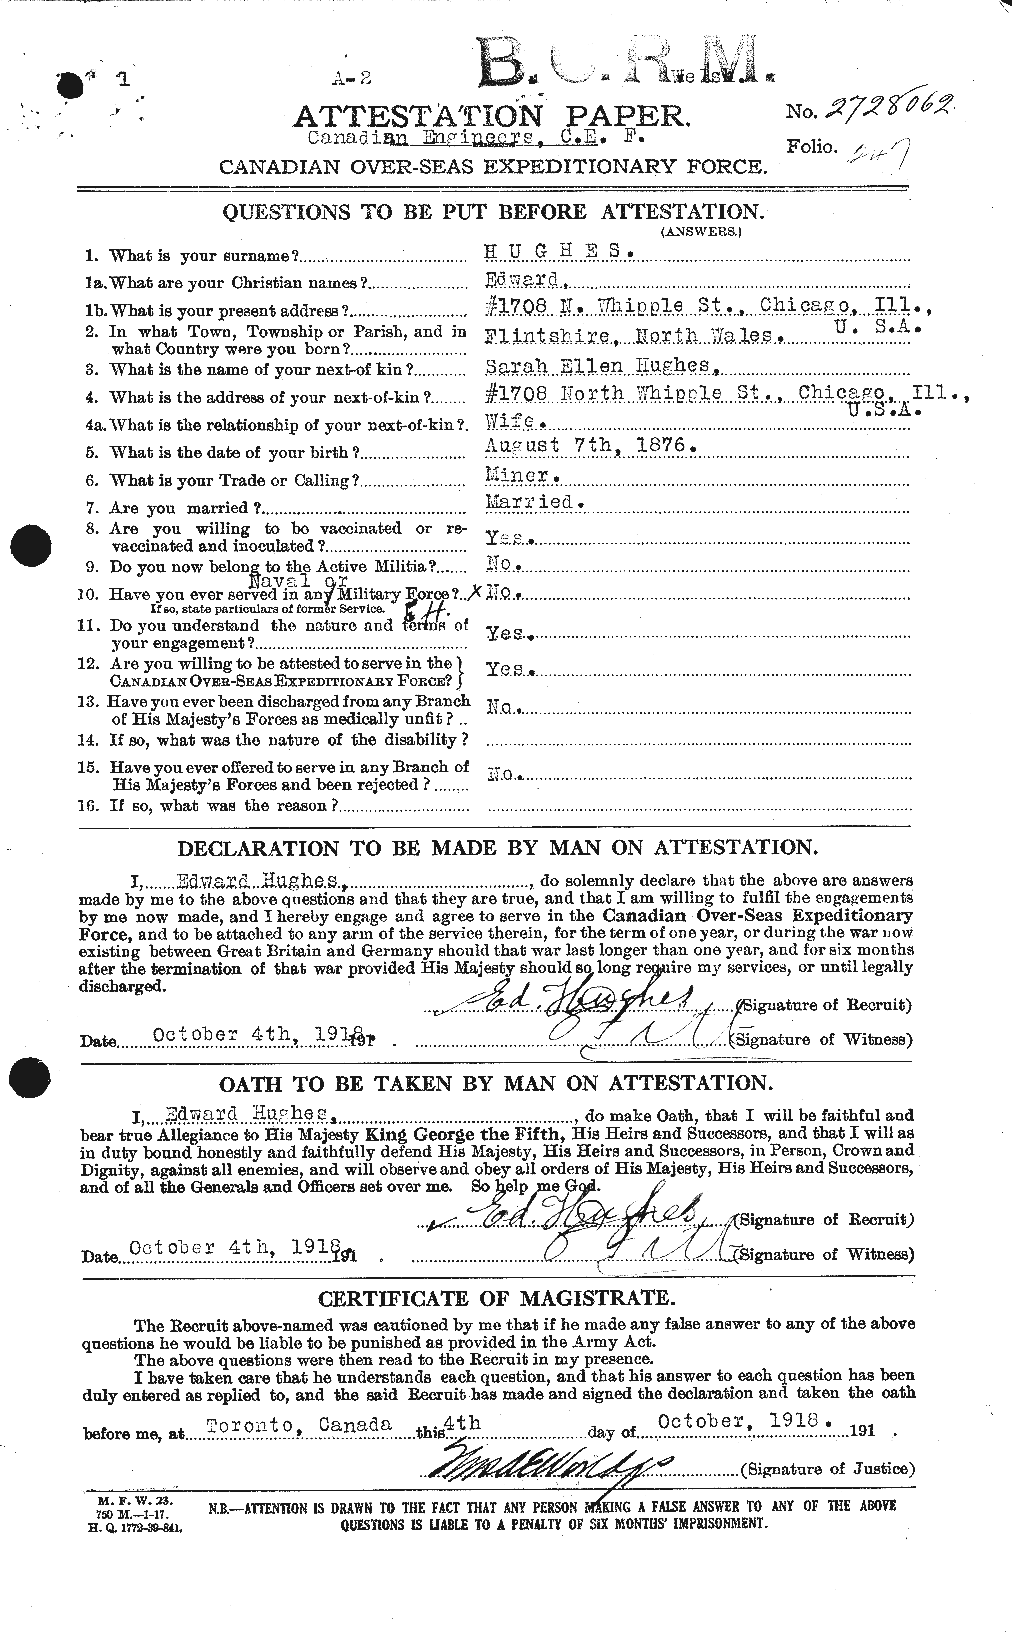 Personnel Records of the First World War - CEF 402666a